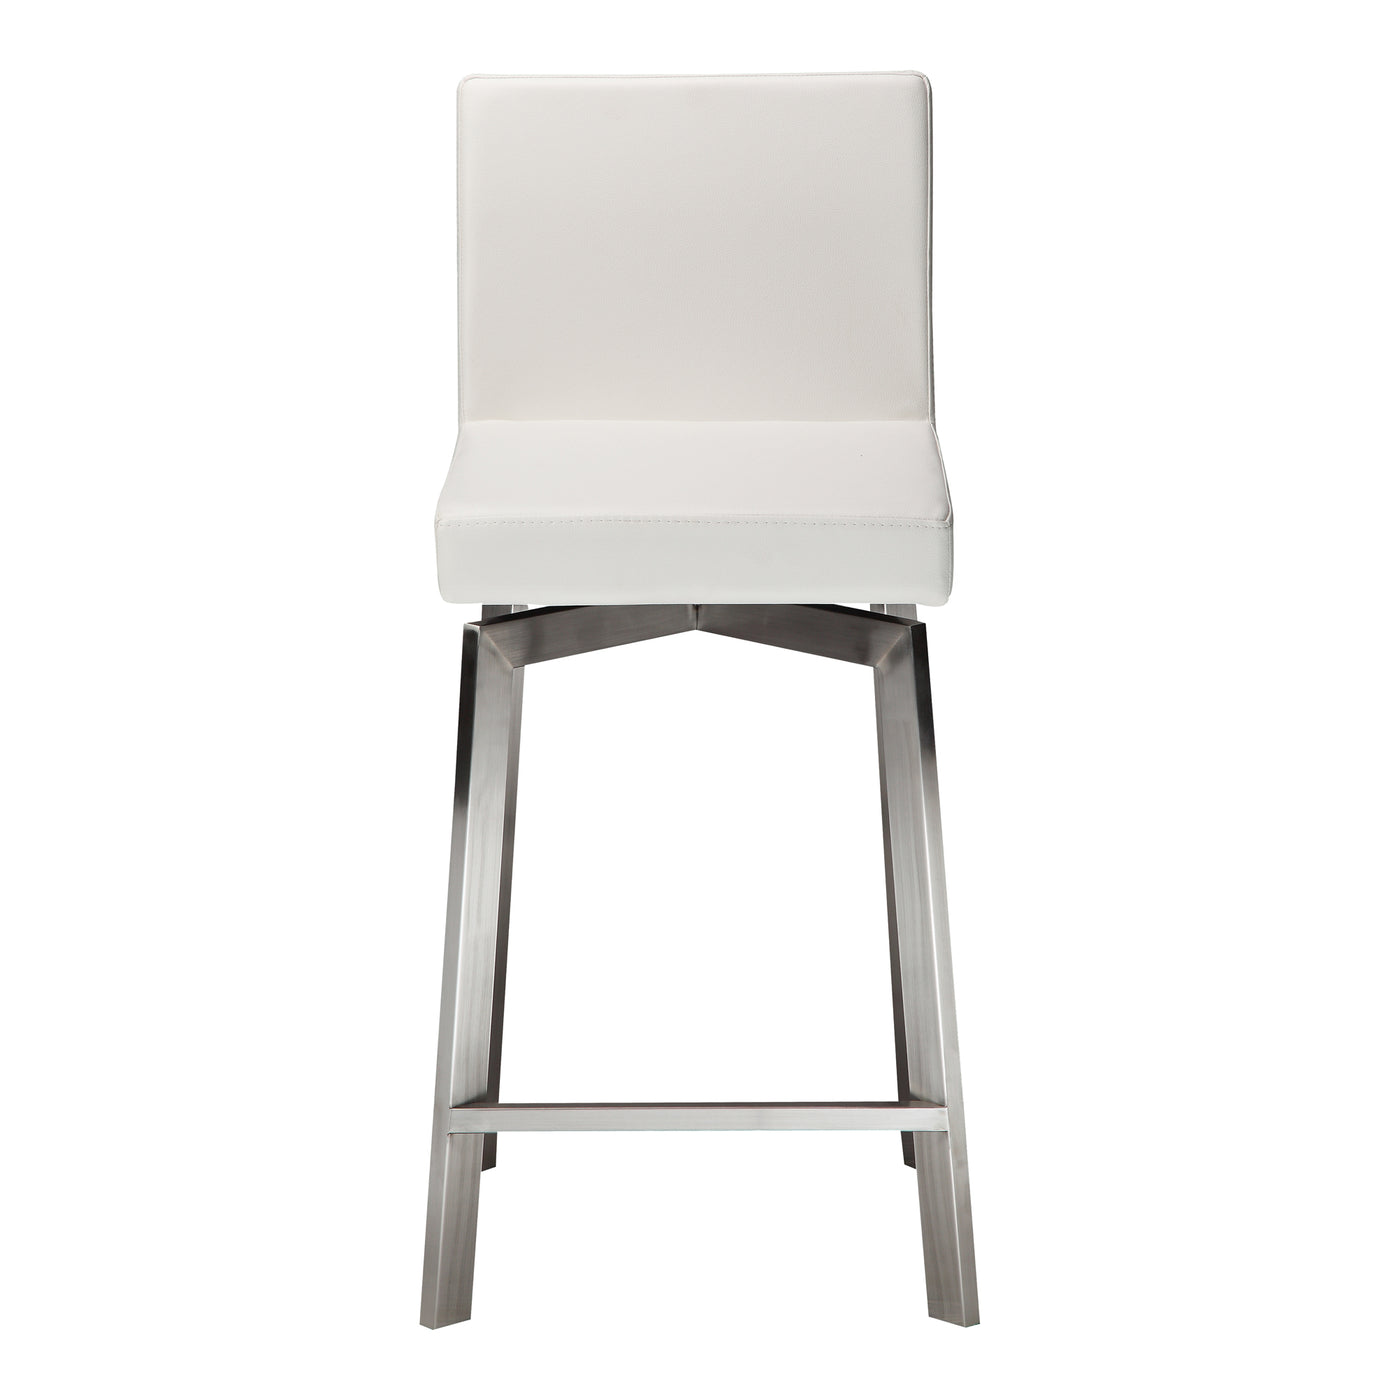 The Giro Stool features a sleek, transitional style, a sturdy steel base and a swivel seat for added functionality.
<h6>Di...